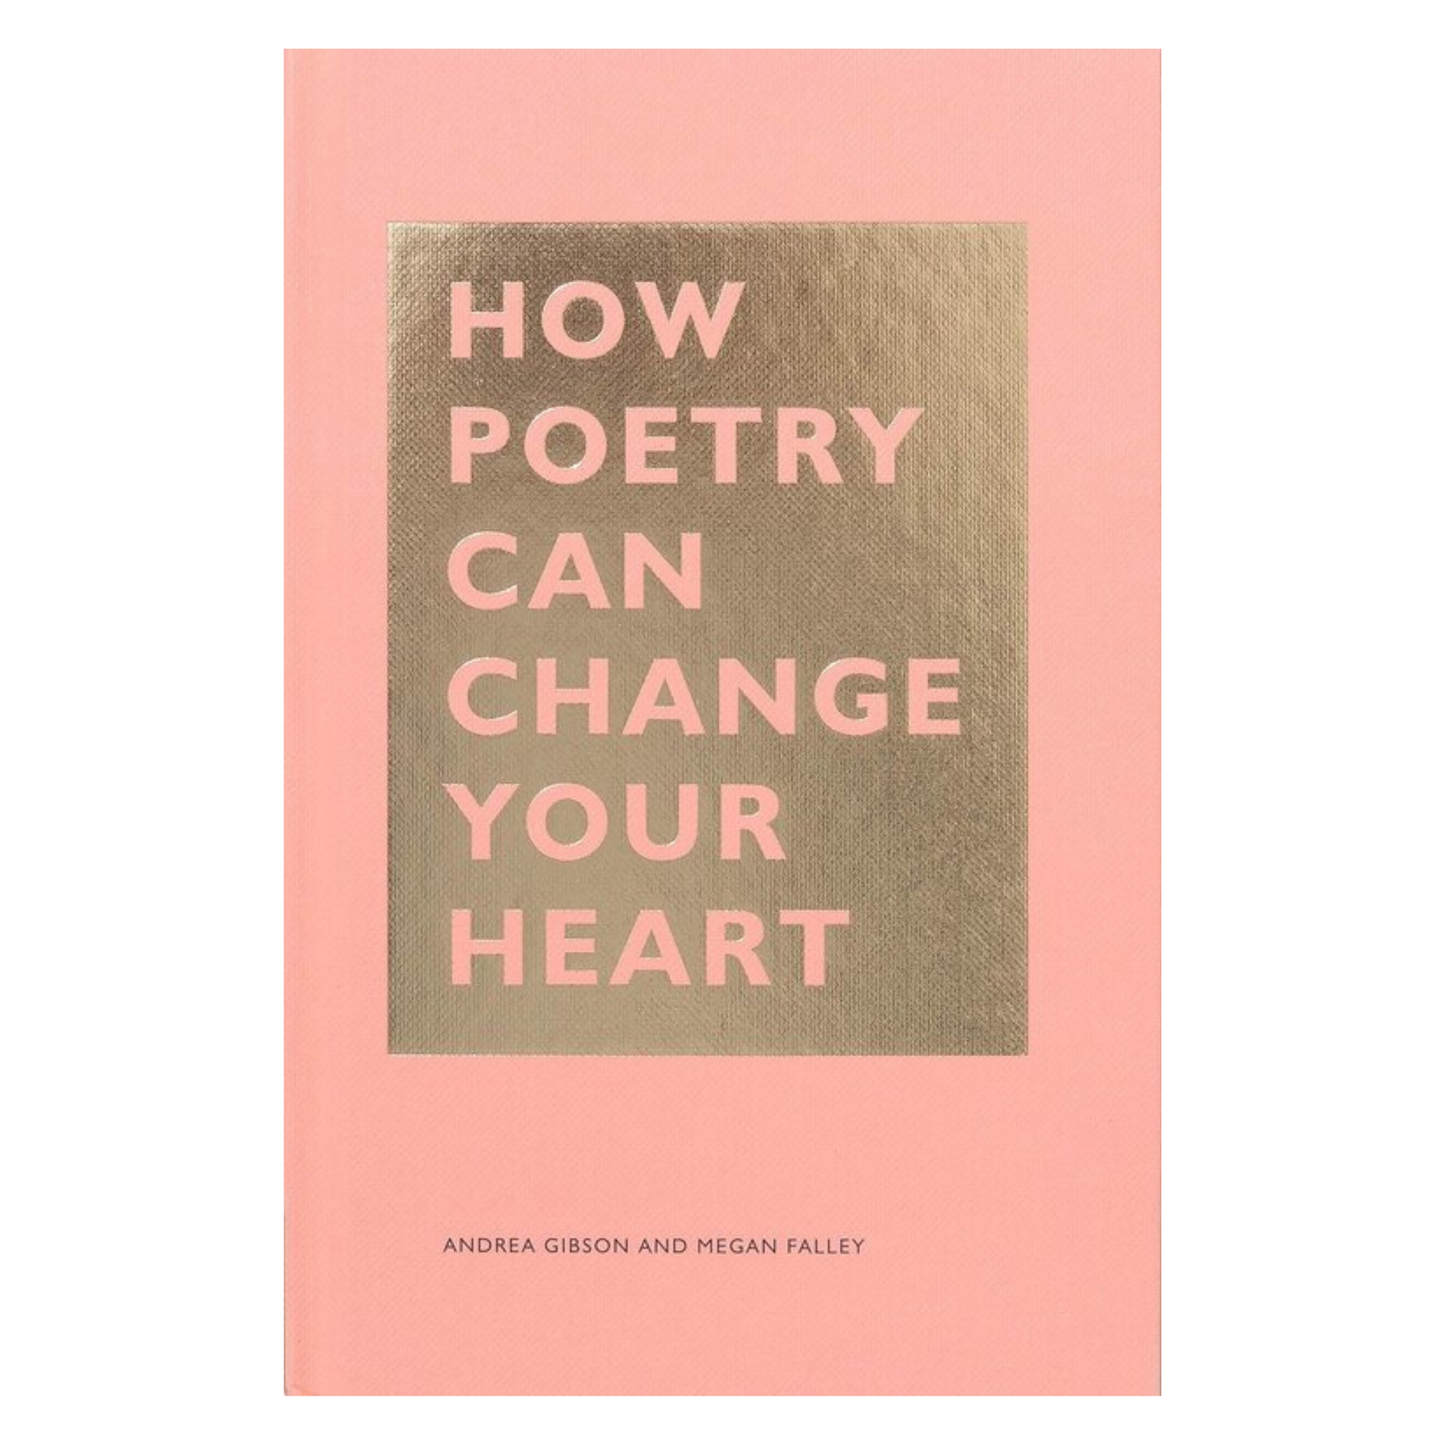 HOW POETRY CAN CHANGE YOUR HEART - SIGNED COPIES AVAILABLE